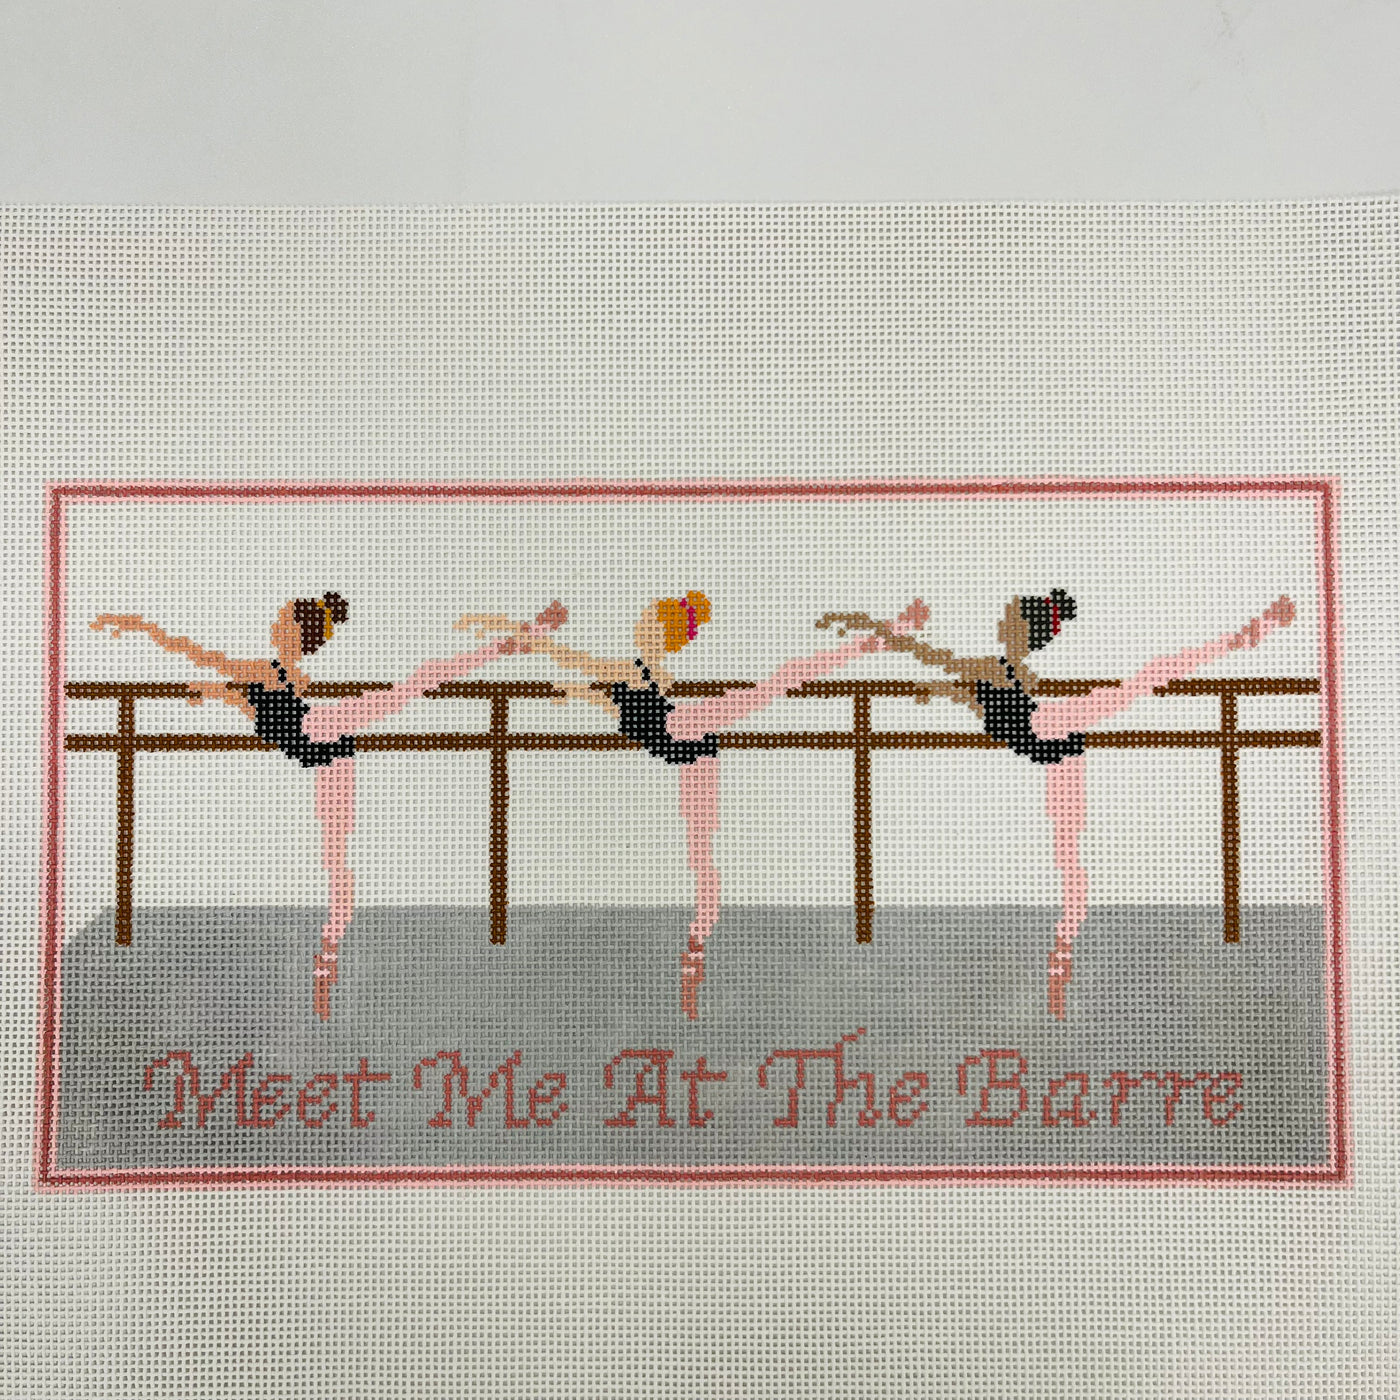 Meet Me At The Barre Needlepoint Canvas